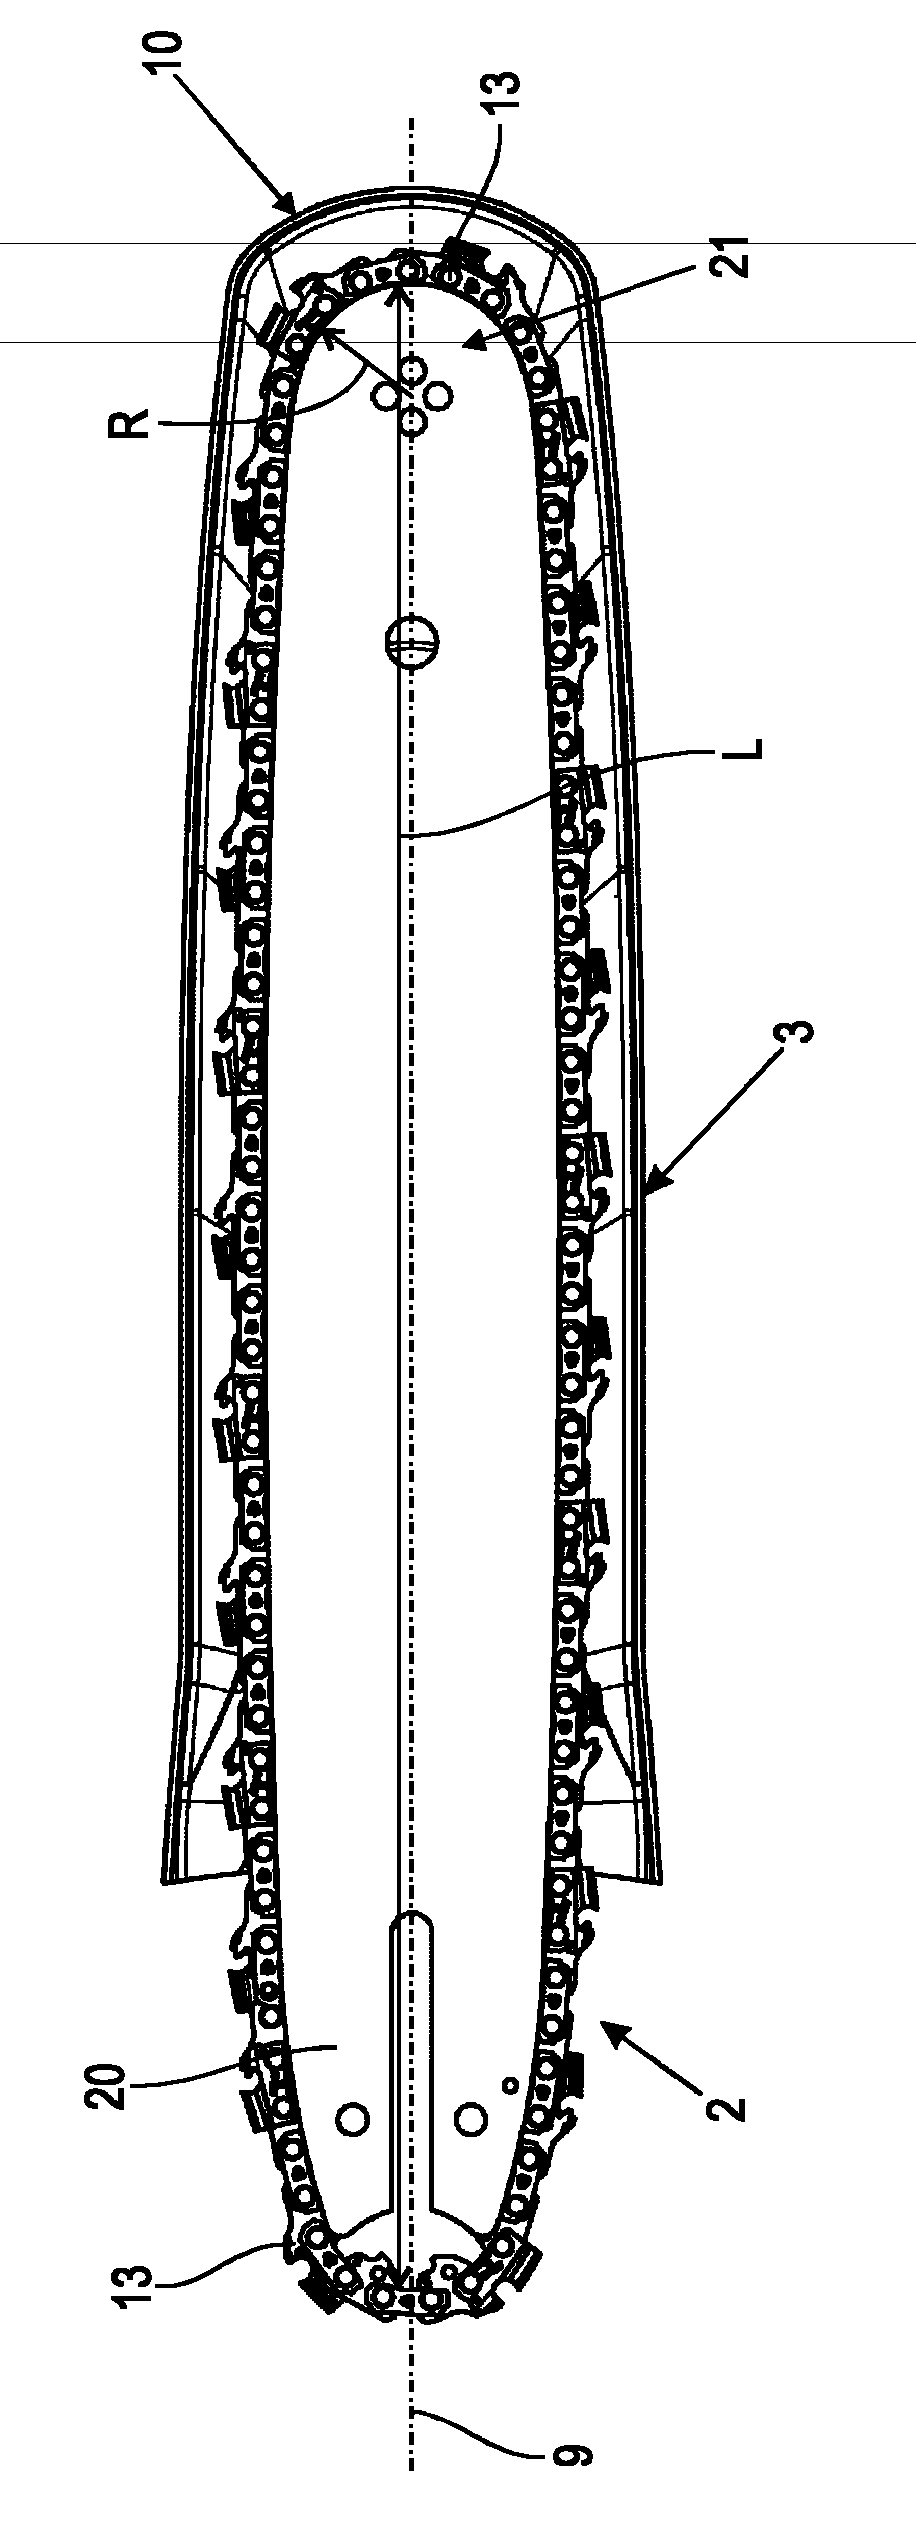 Chain guard and chainsaw system